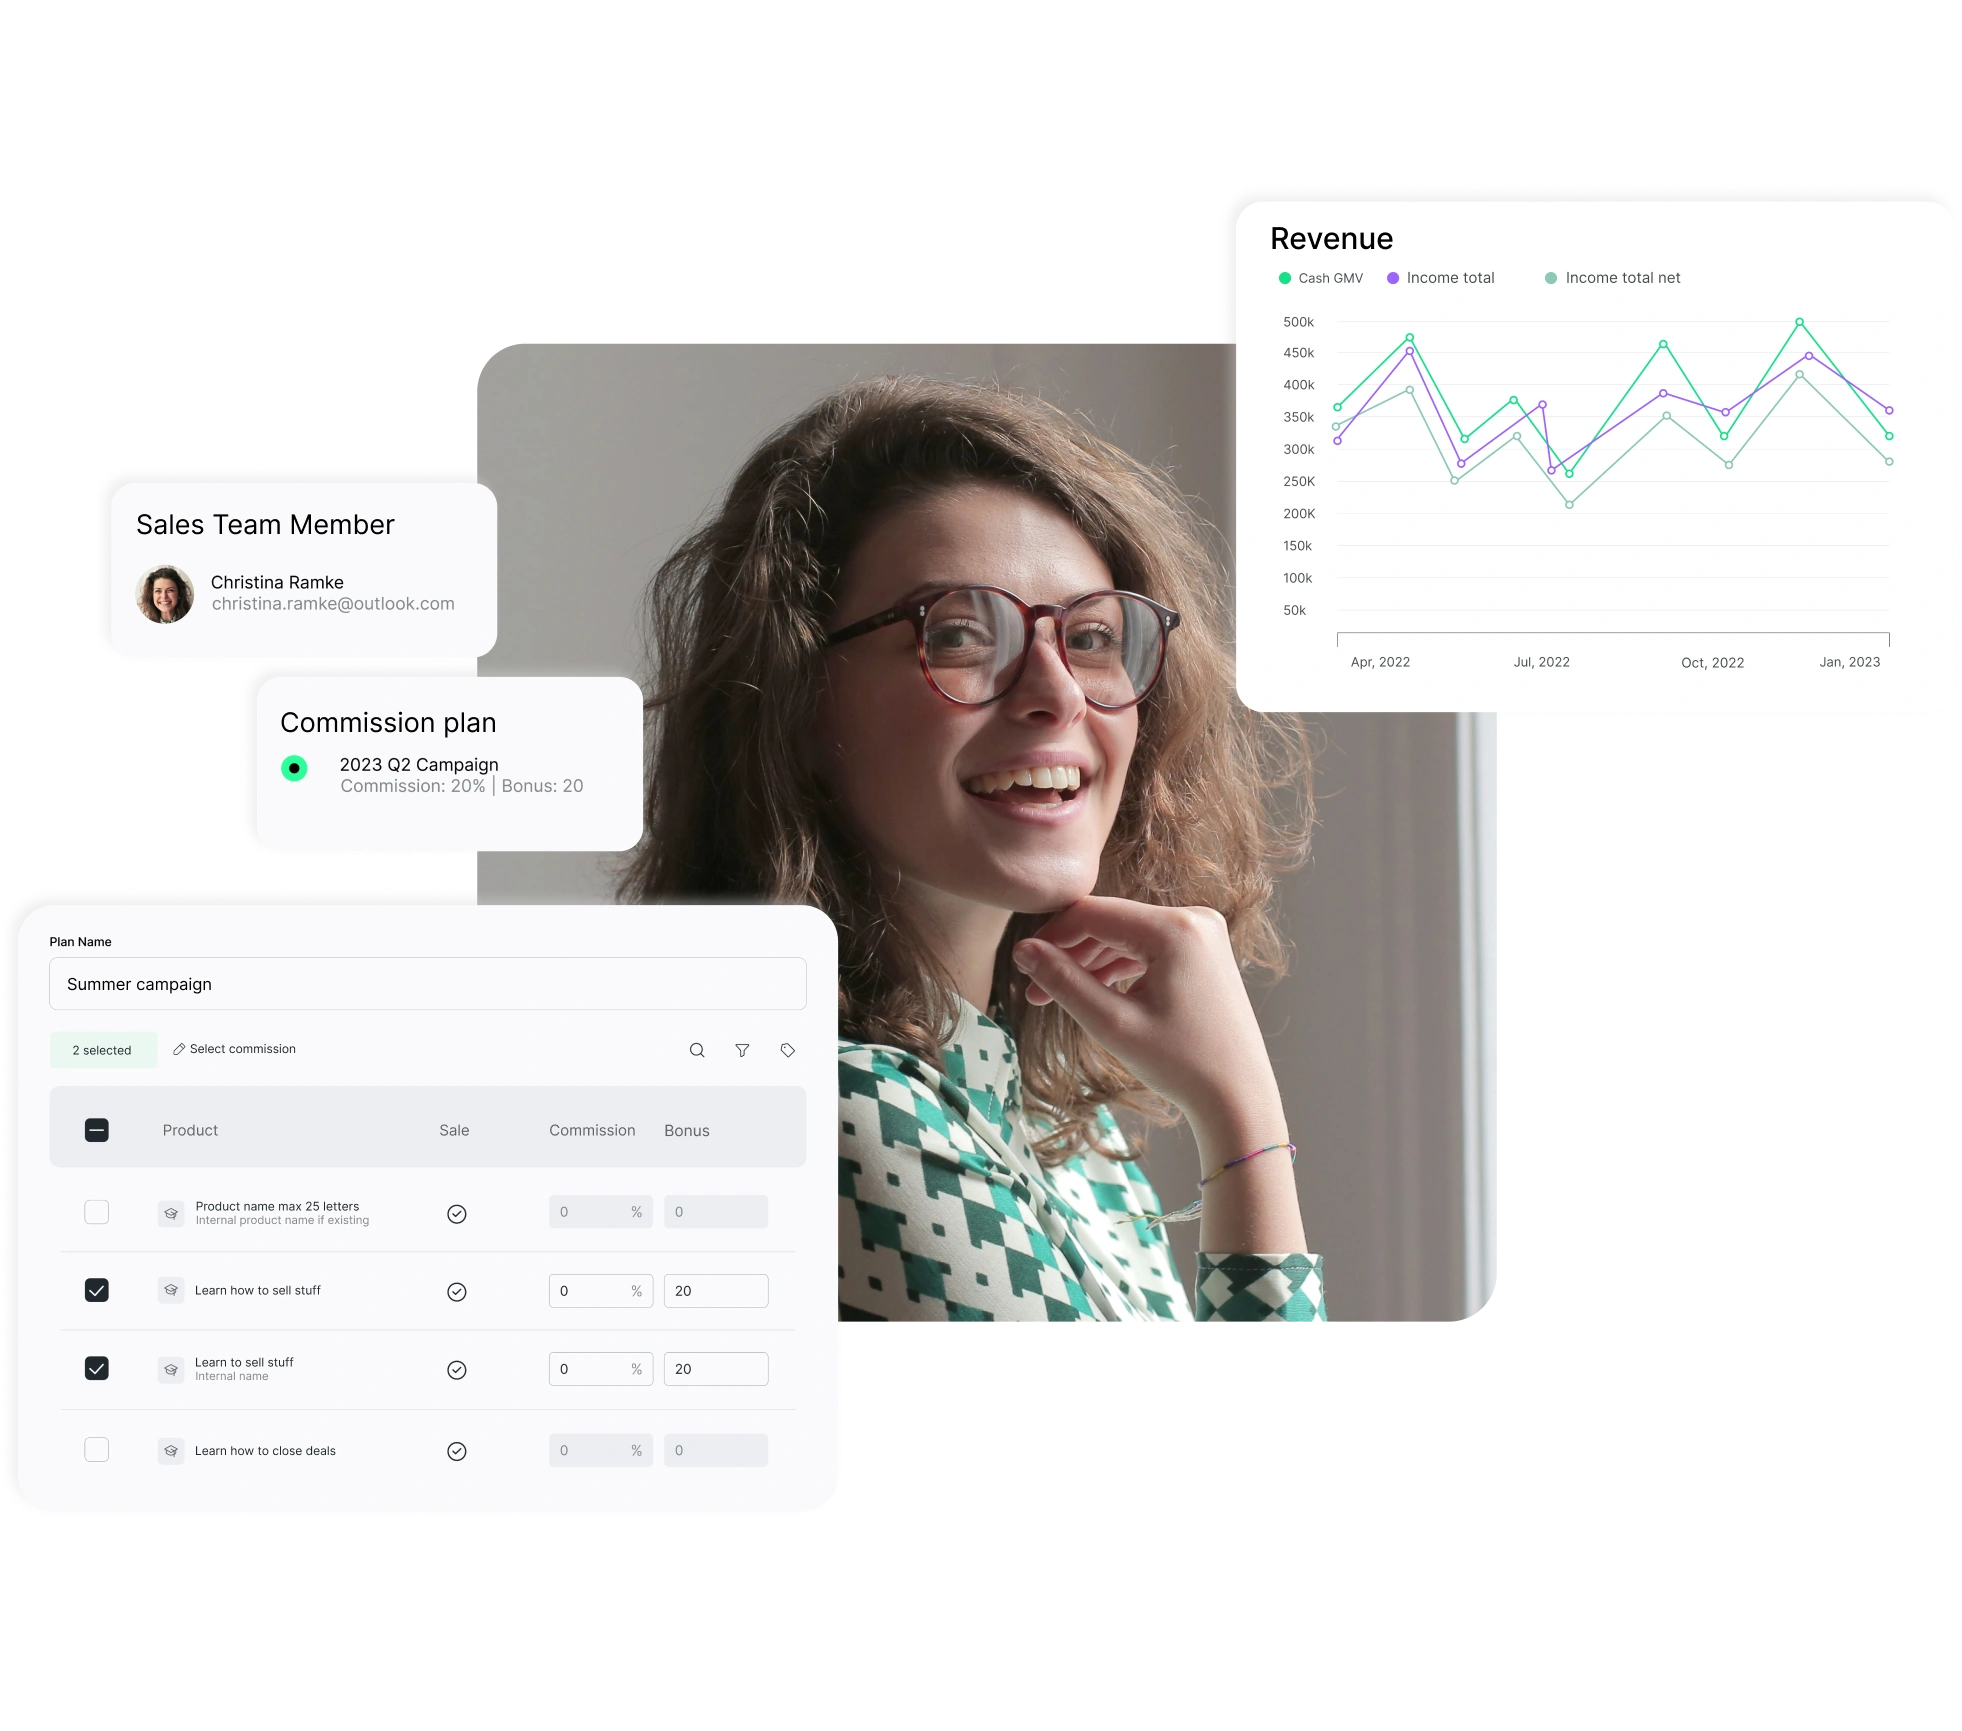 Manage your sales team members on one platform